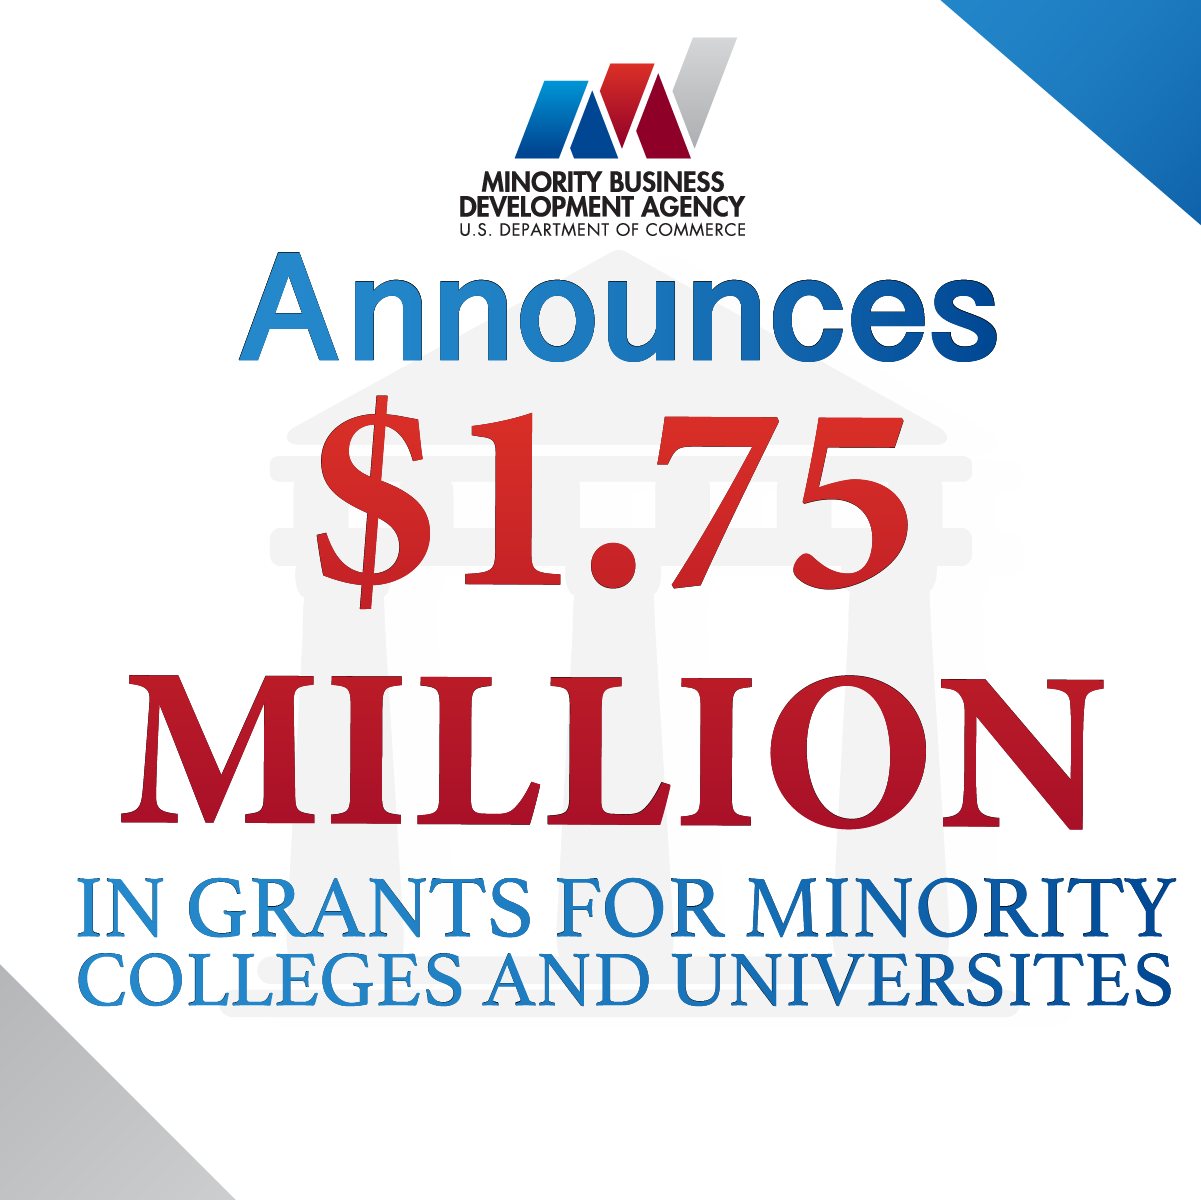 MBDA Announces $1.75 Million in Grants for Minority Colleges and Universities